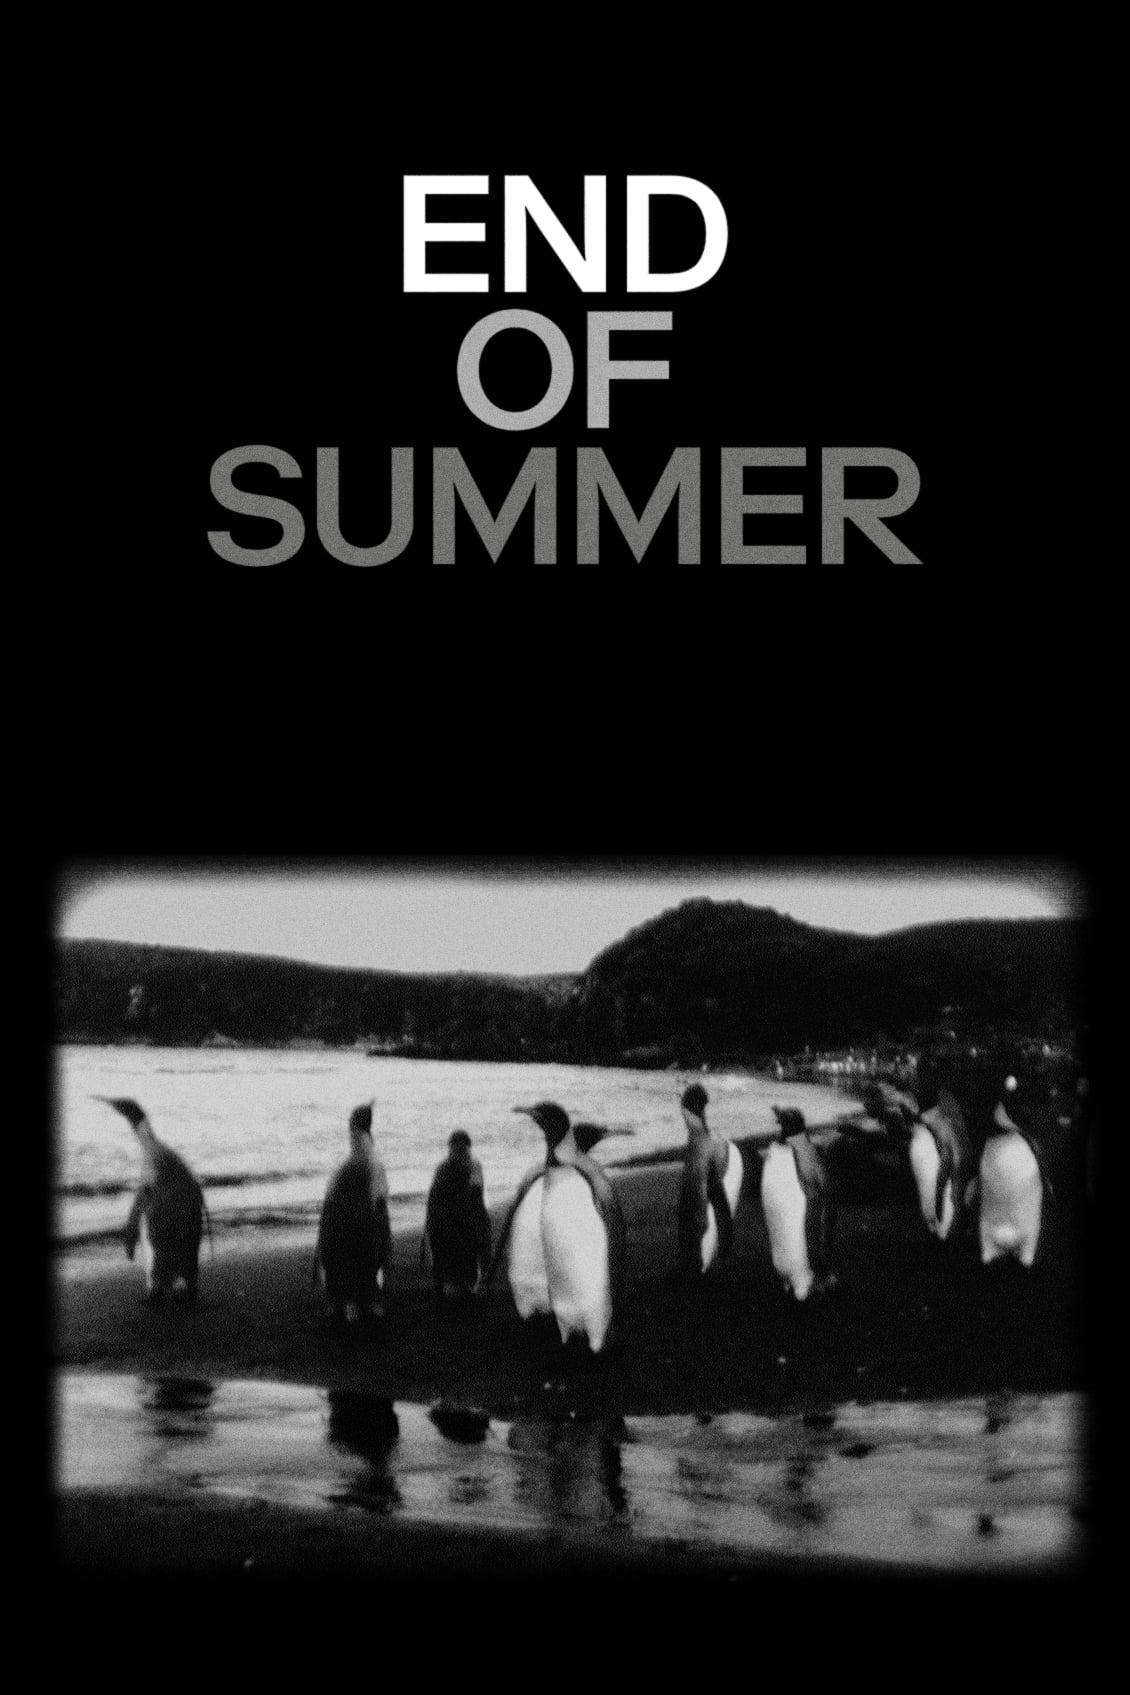 End of Summer poster